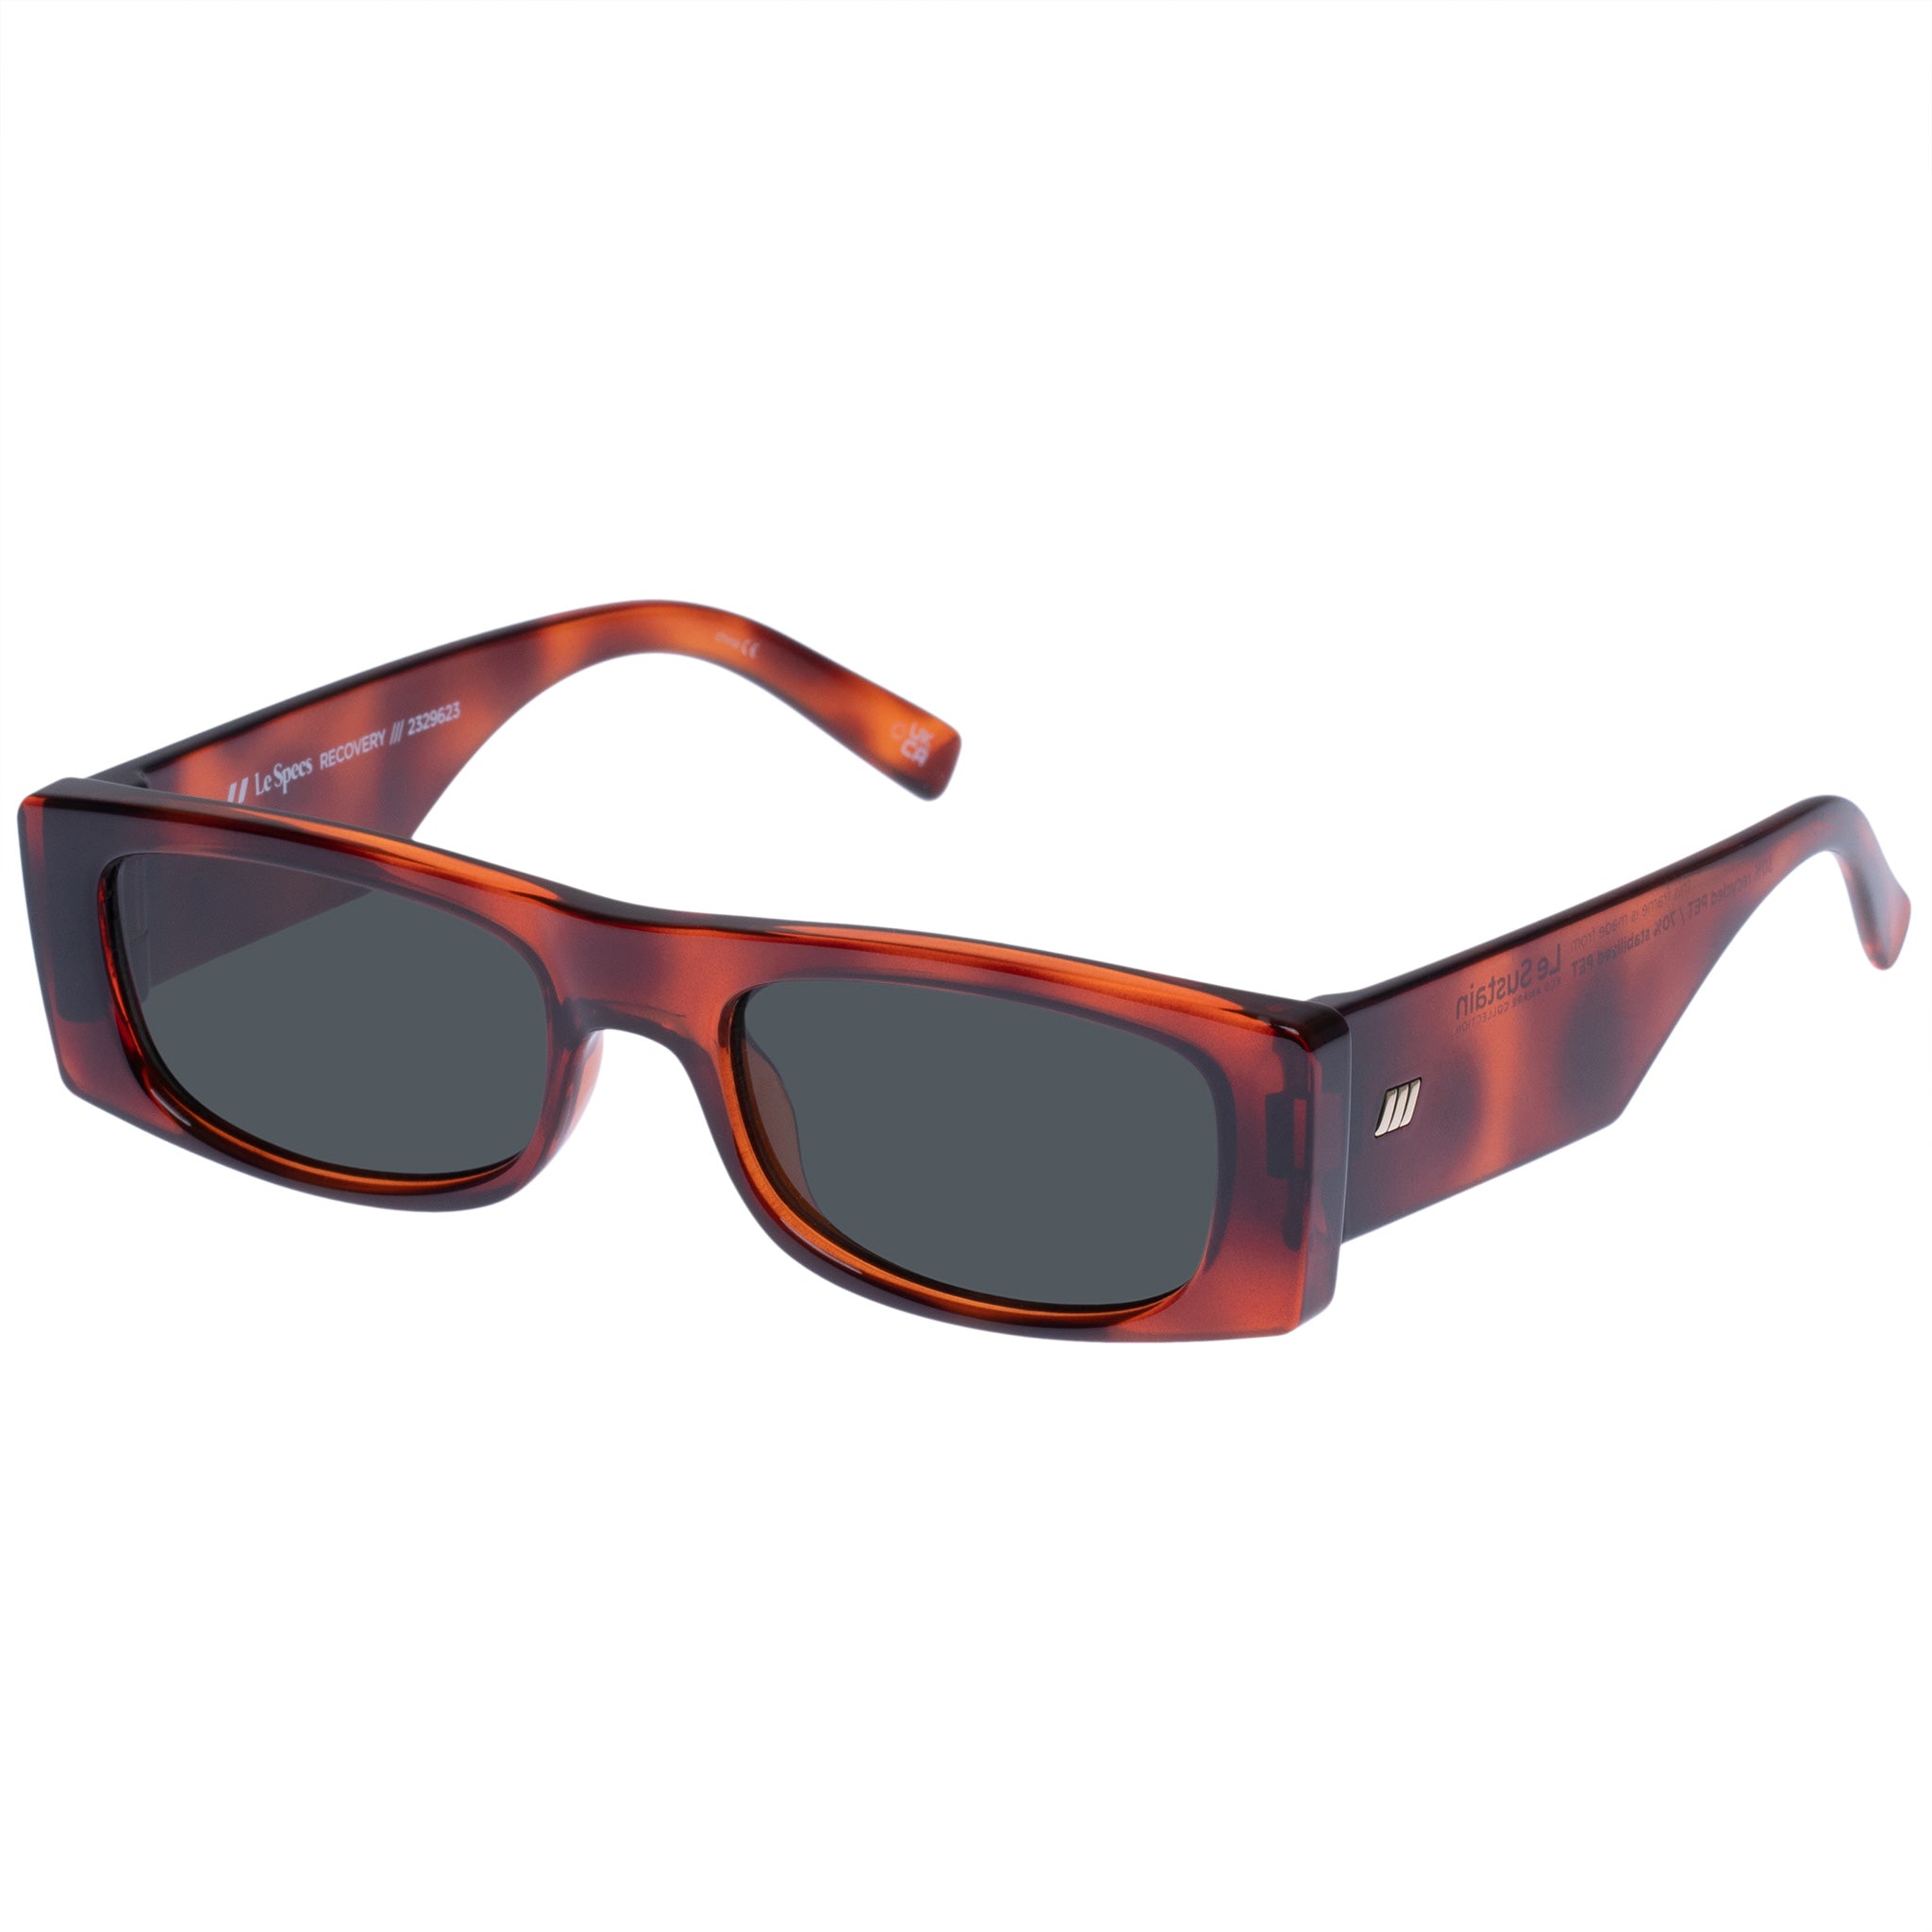 Le Specs Women's Recovery Tort Rectangle Sunglasses | Eyewear Index